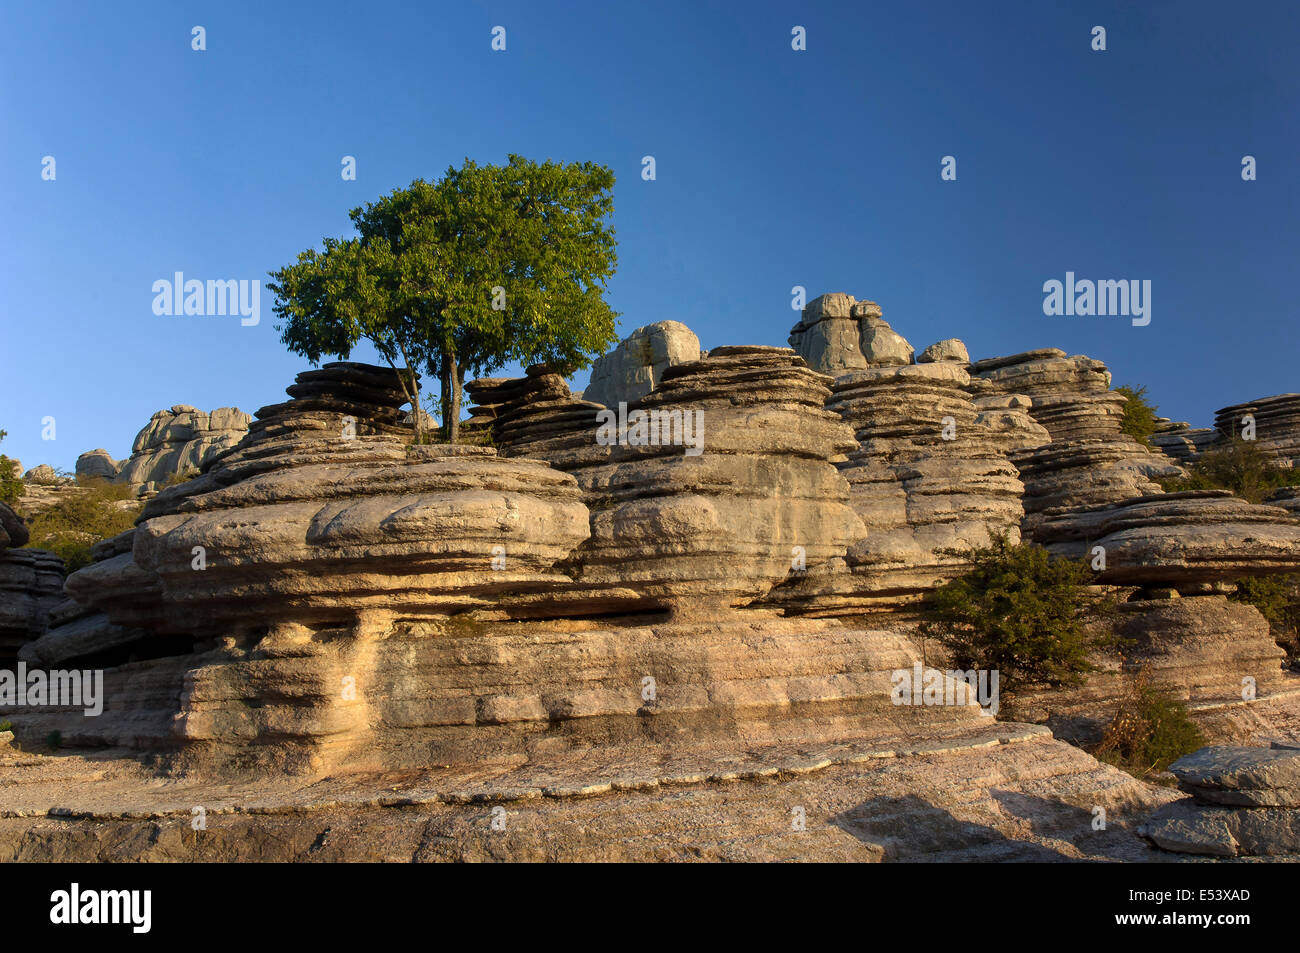 Torcal de Antequera Natural Park, Antequera, Malaga-province, Region of Andalusia, Spain, Europe Stock Photo